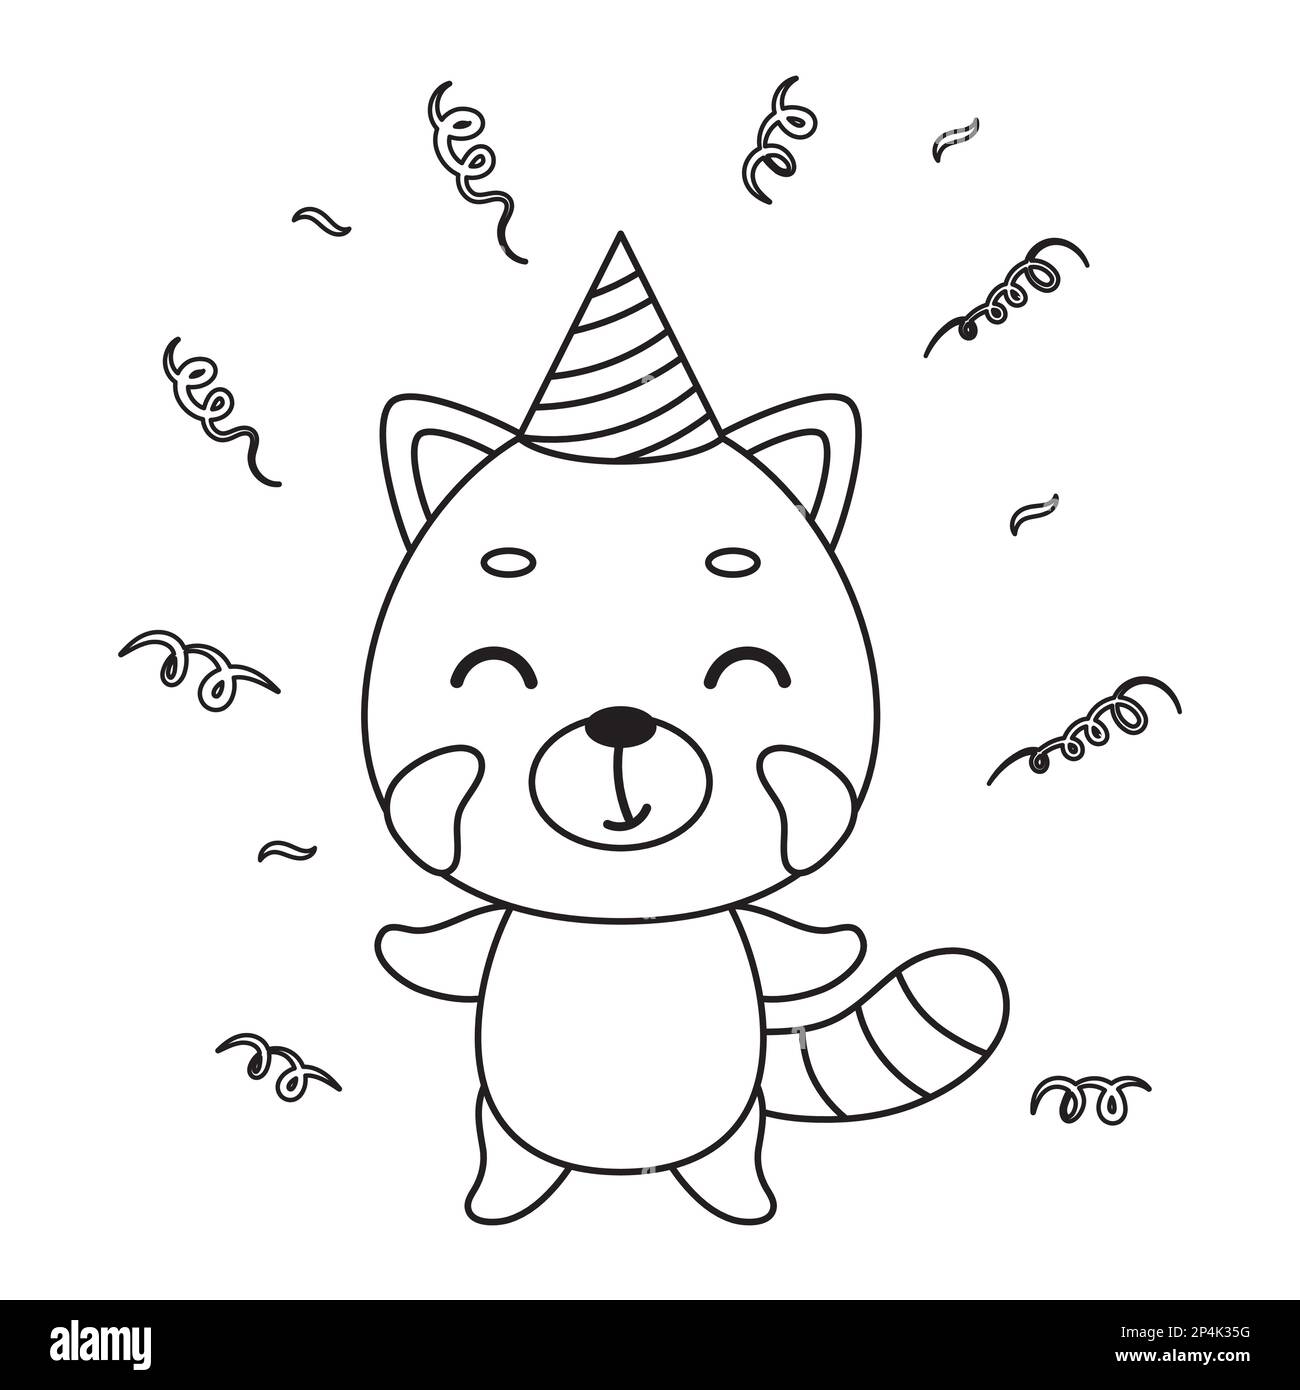 Coloring page cute little red panda in birthday hat coloring book for kids educational activity for preschool years kids and toddlers with cute anim stock vector image art